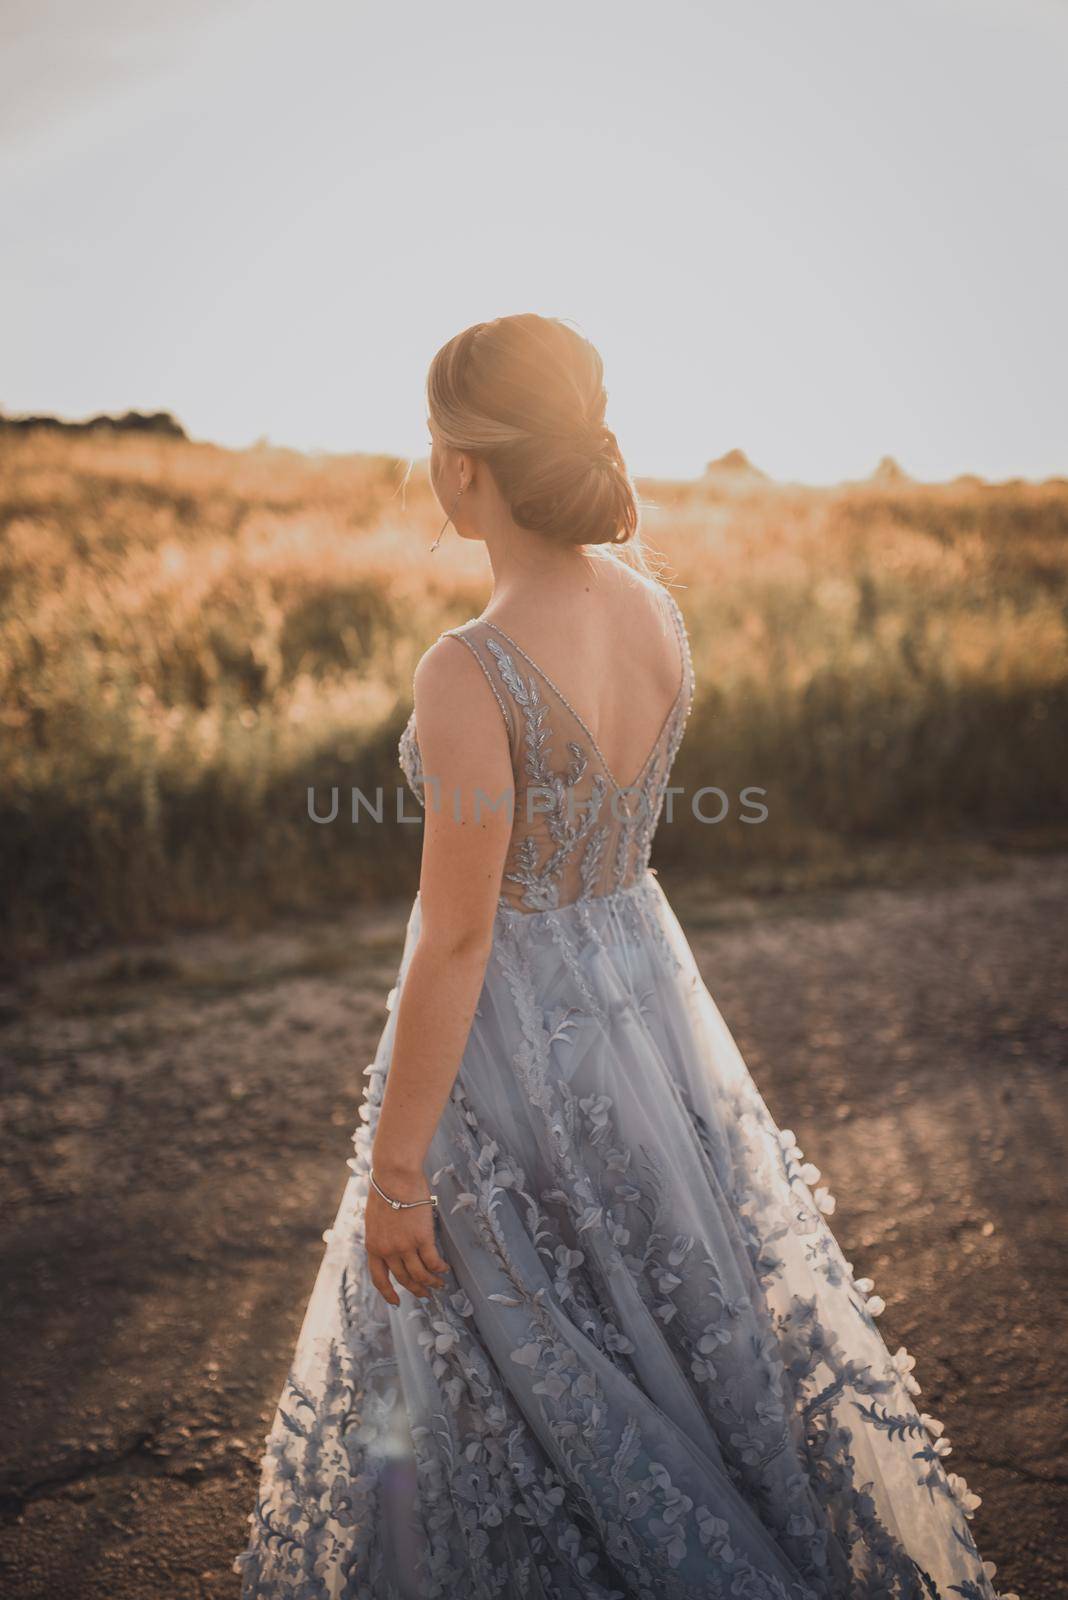 a young girl walks along an asphalt road in a gray blue long dress at sunset. back and arms open. Near the road tall yellow grass grows. The background is blurred.